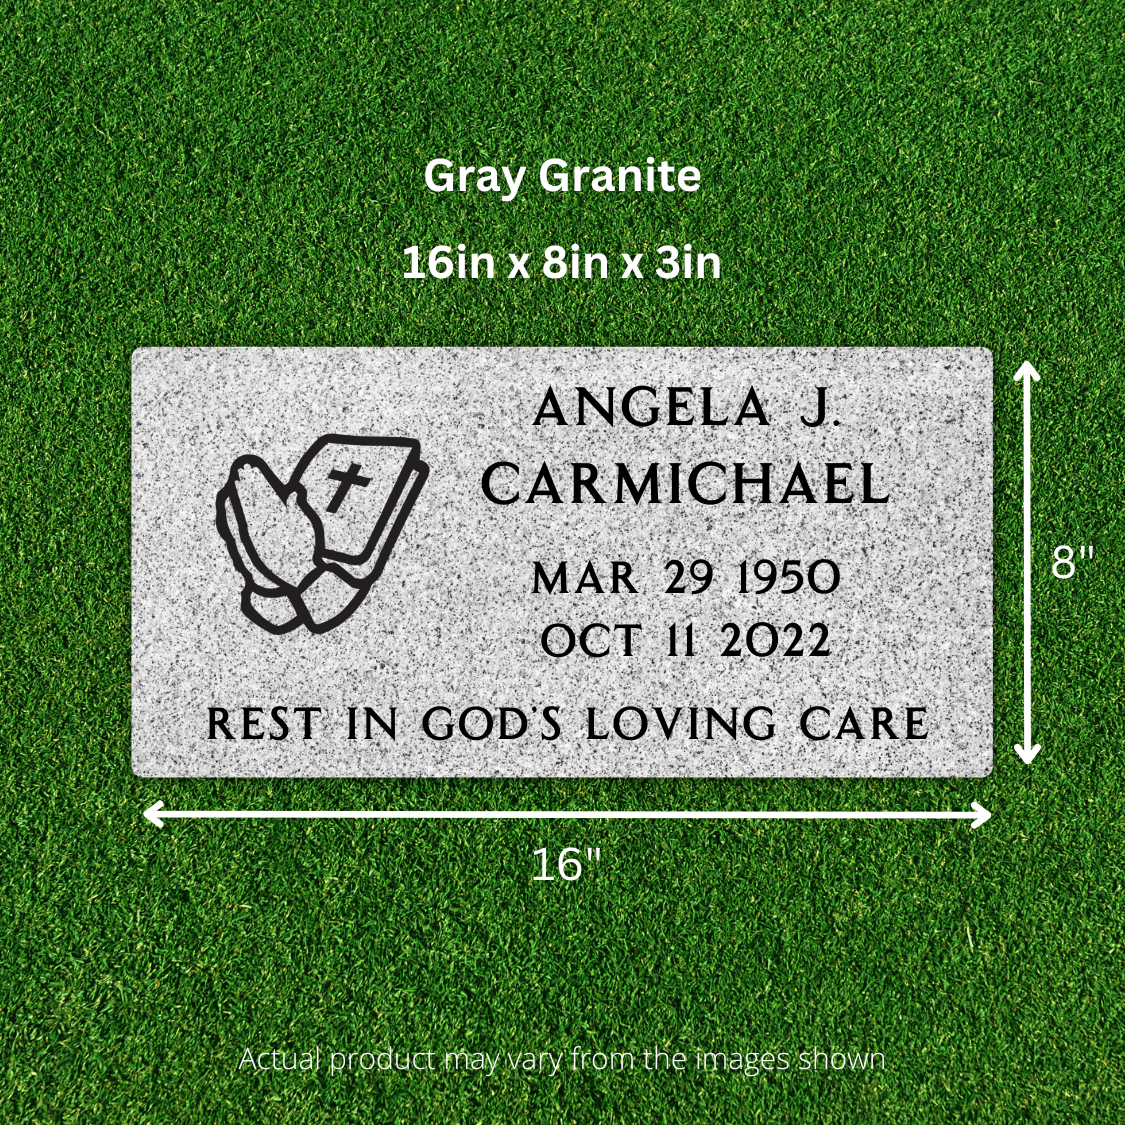 Flat Headstone Marker with Symbol & Epitaph - (16in x 8in x 3in) - Markers & Headstones